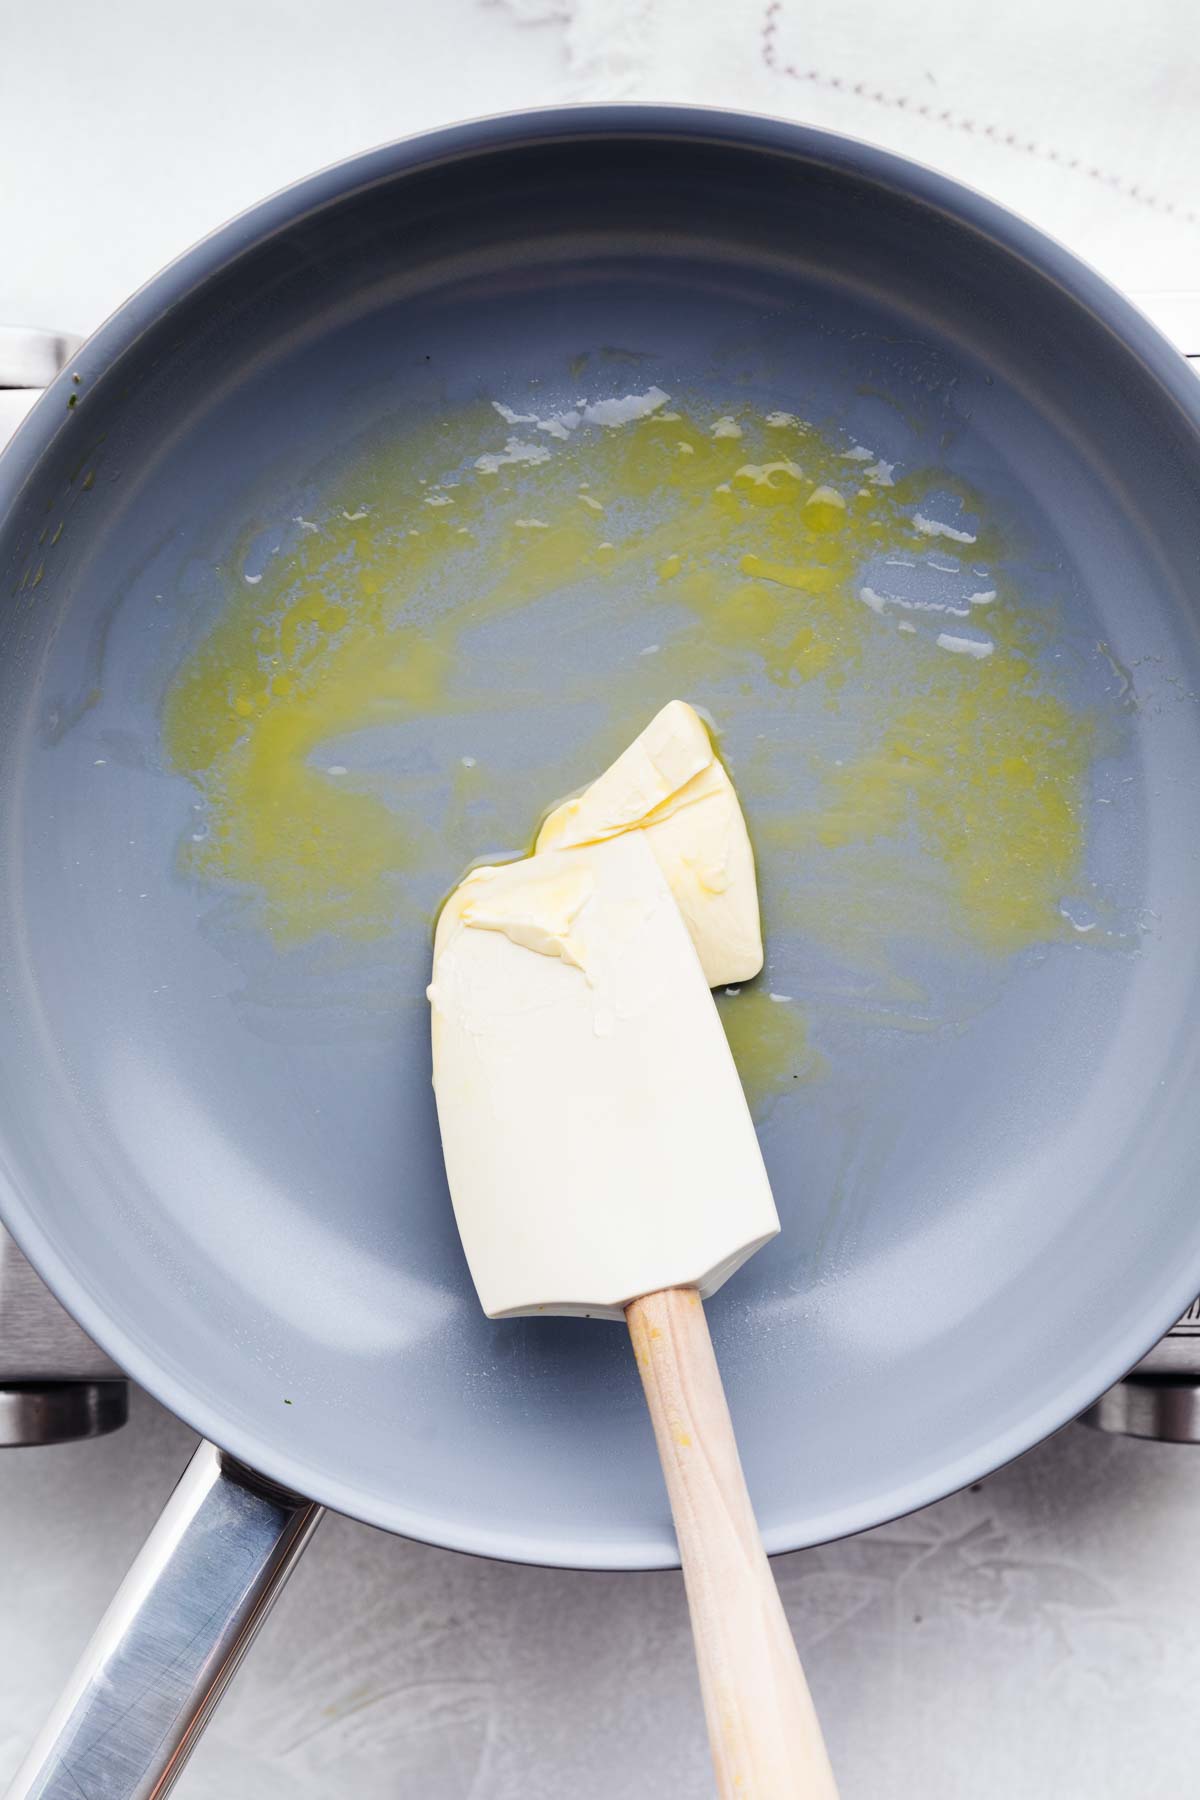 A blue pan on a little silver colored stove with melting butter in the hot pan and a spatula.